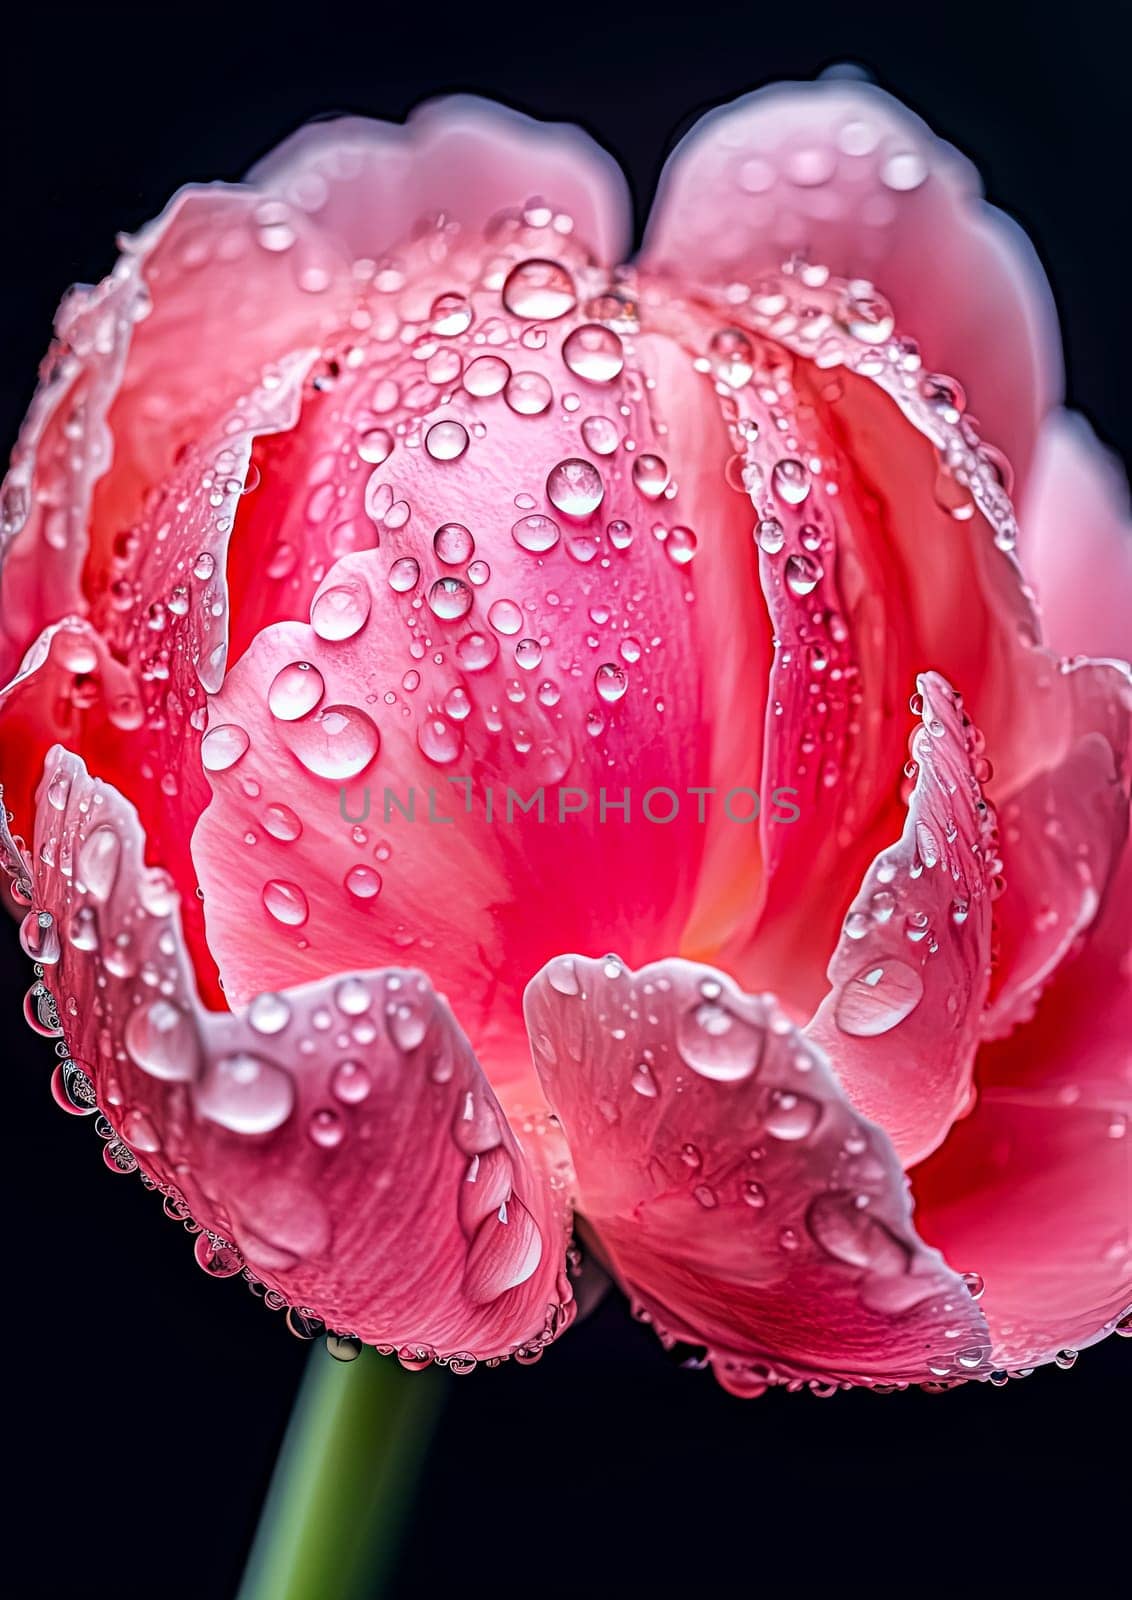 A beautiful pink flower with droplets of water on it. The droplets are small and scattered, giving the flower a delicate and serene appearance